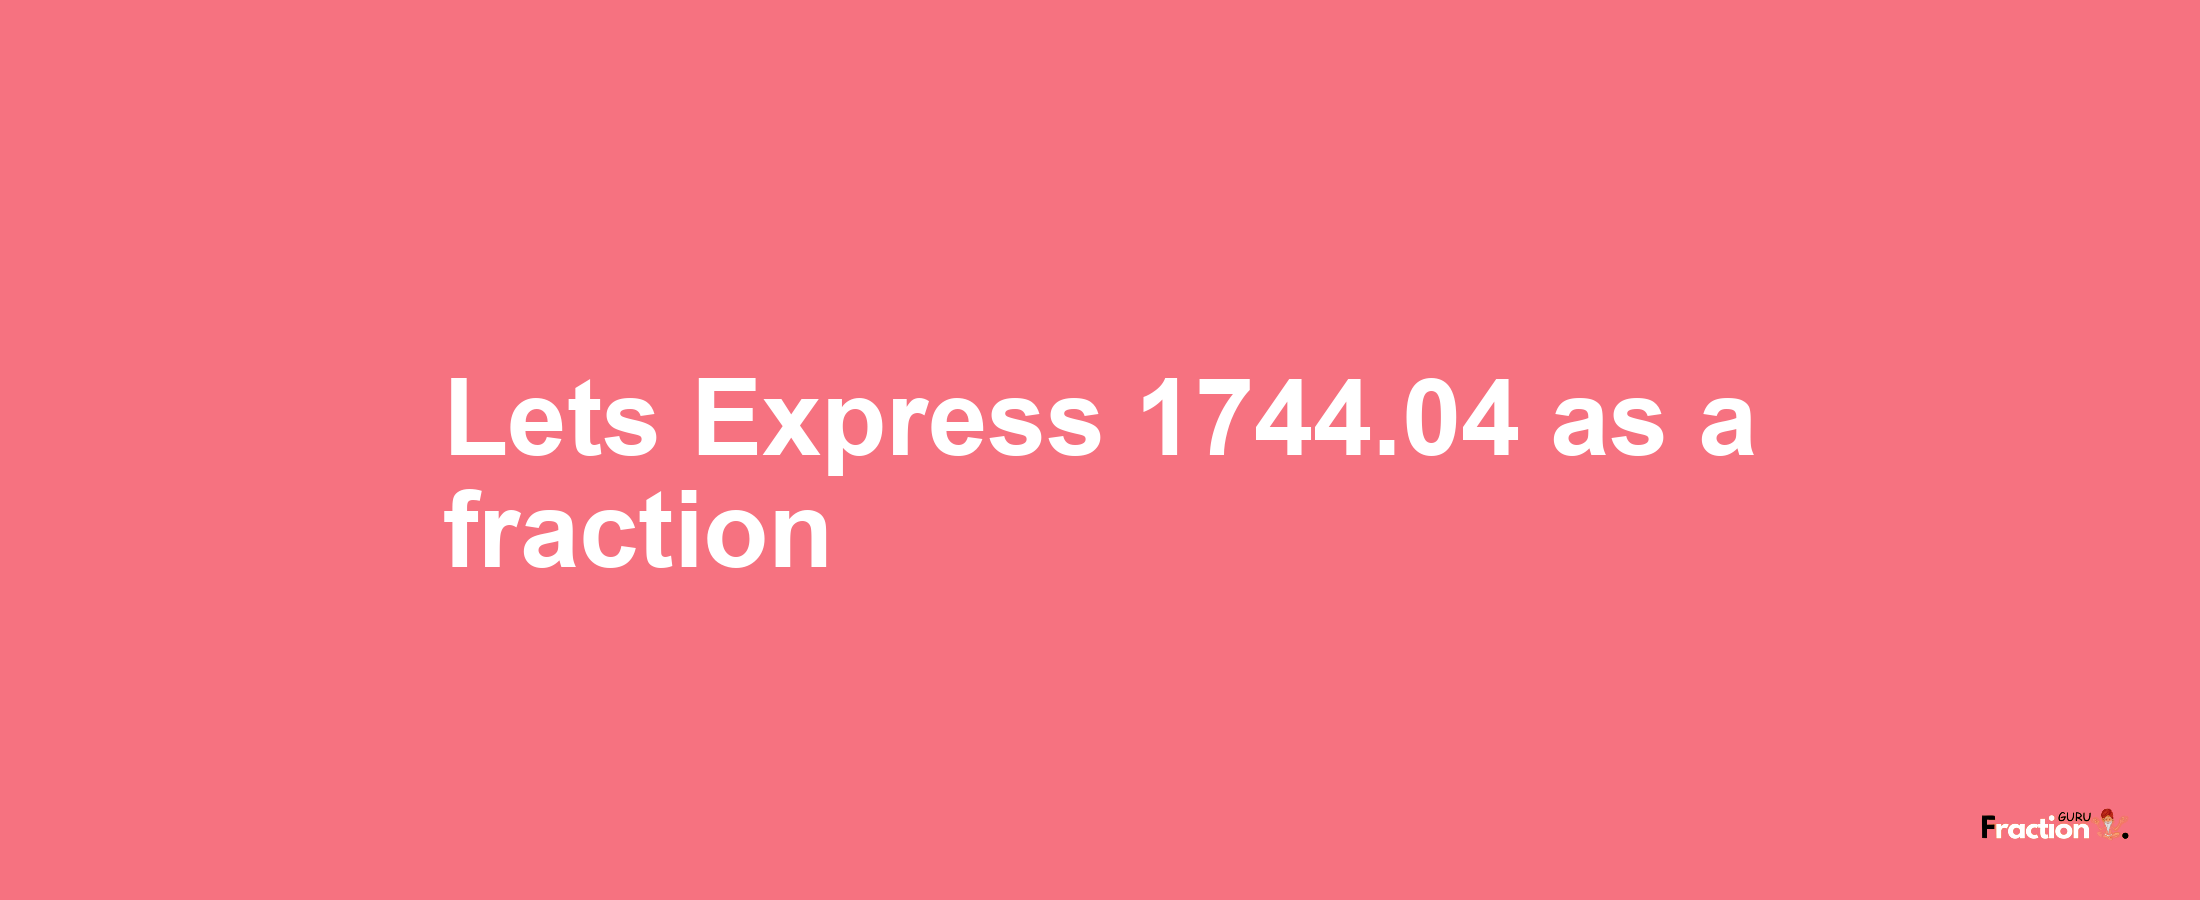 Lets Express 1744.04 as afraction